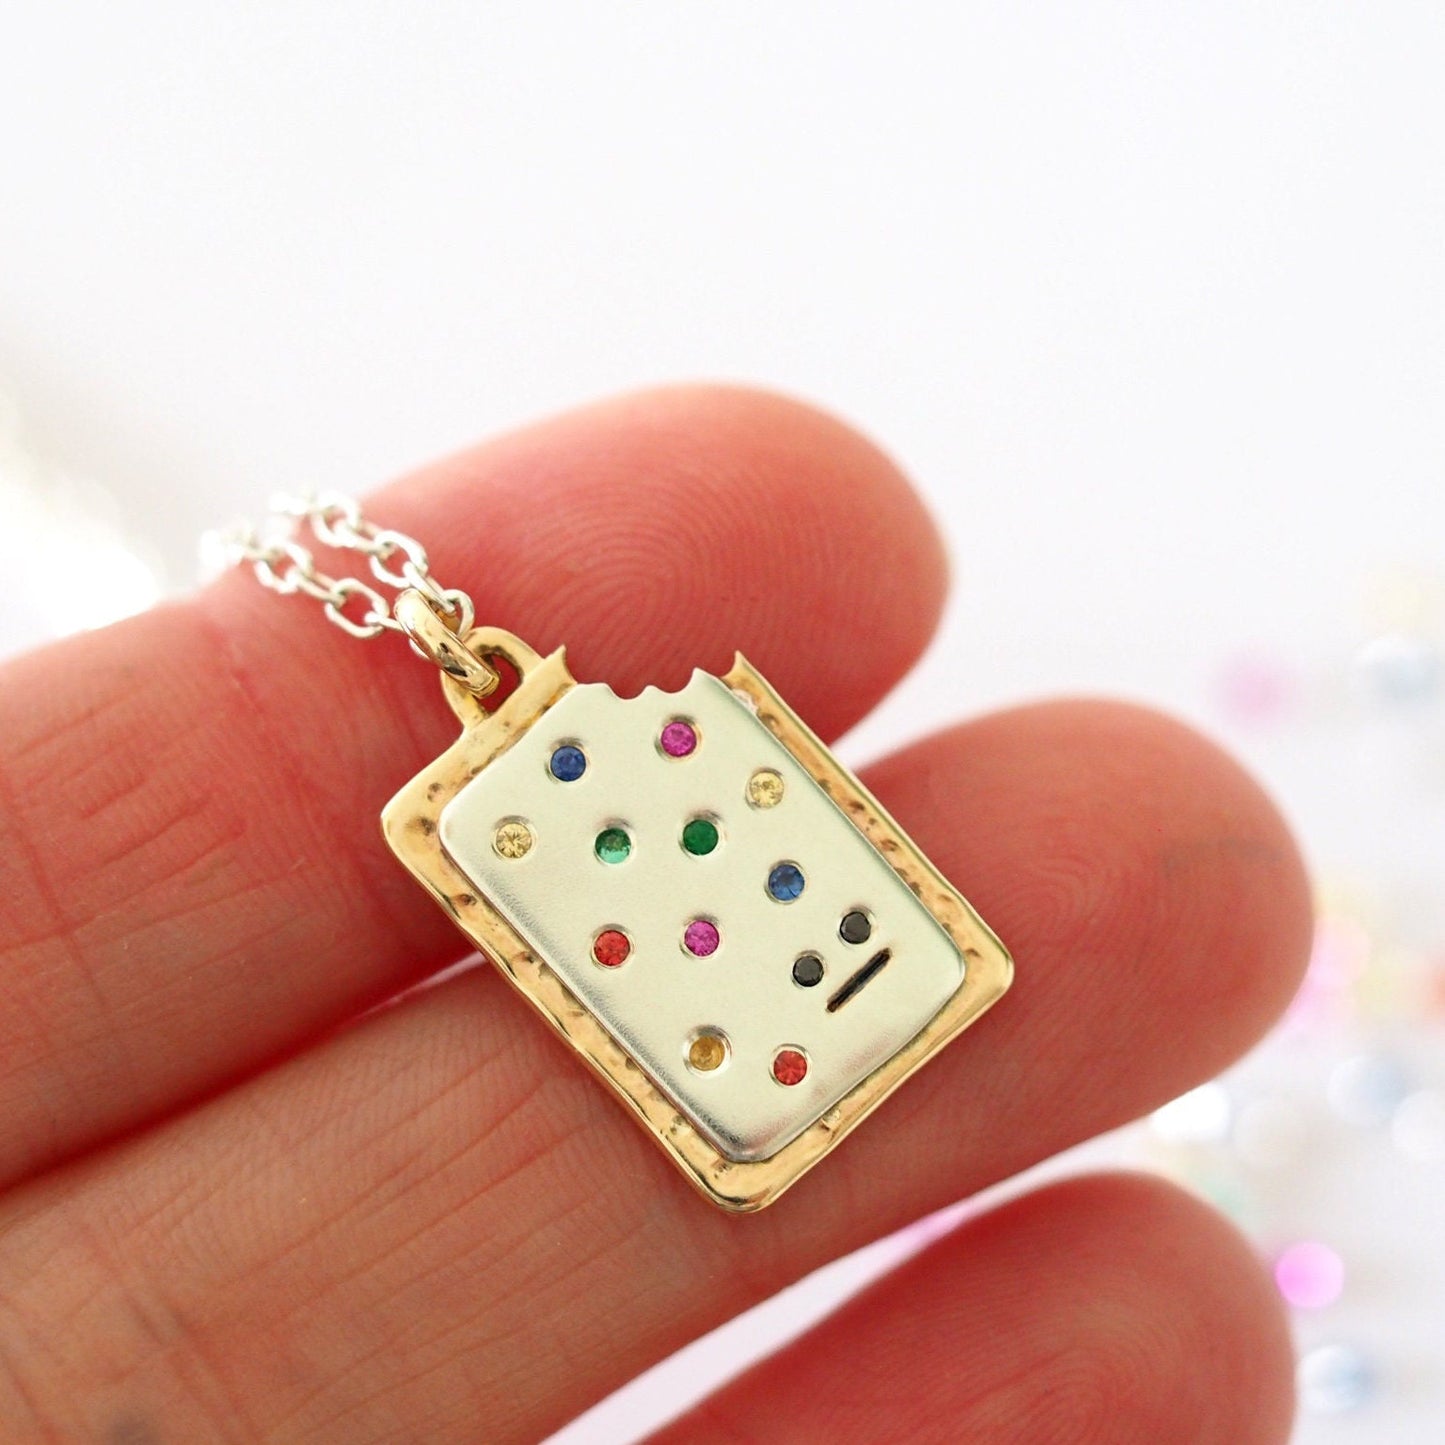 Pop-Tart Necklace - Silver, Gold and Sapphires